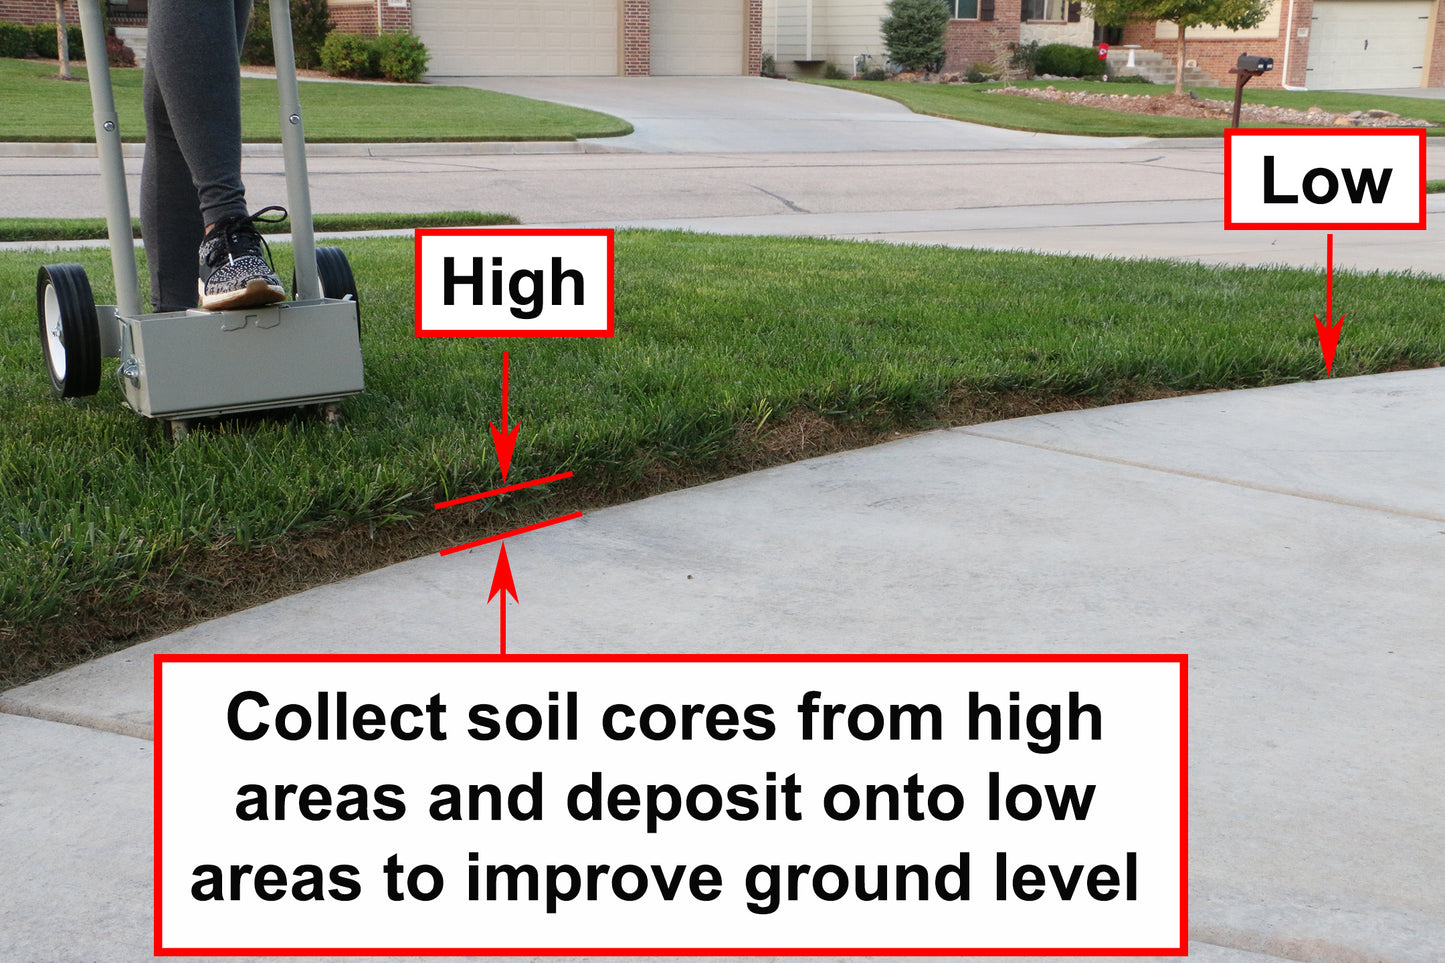 Step 'N Tilt Core Lawn Aerator Version 4 Kit (3.4 Inch Standard Length Coring Tines with Soil Core Container)